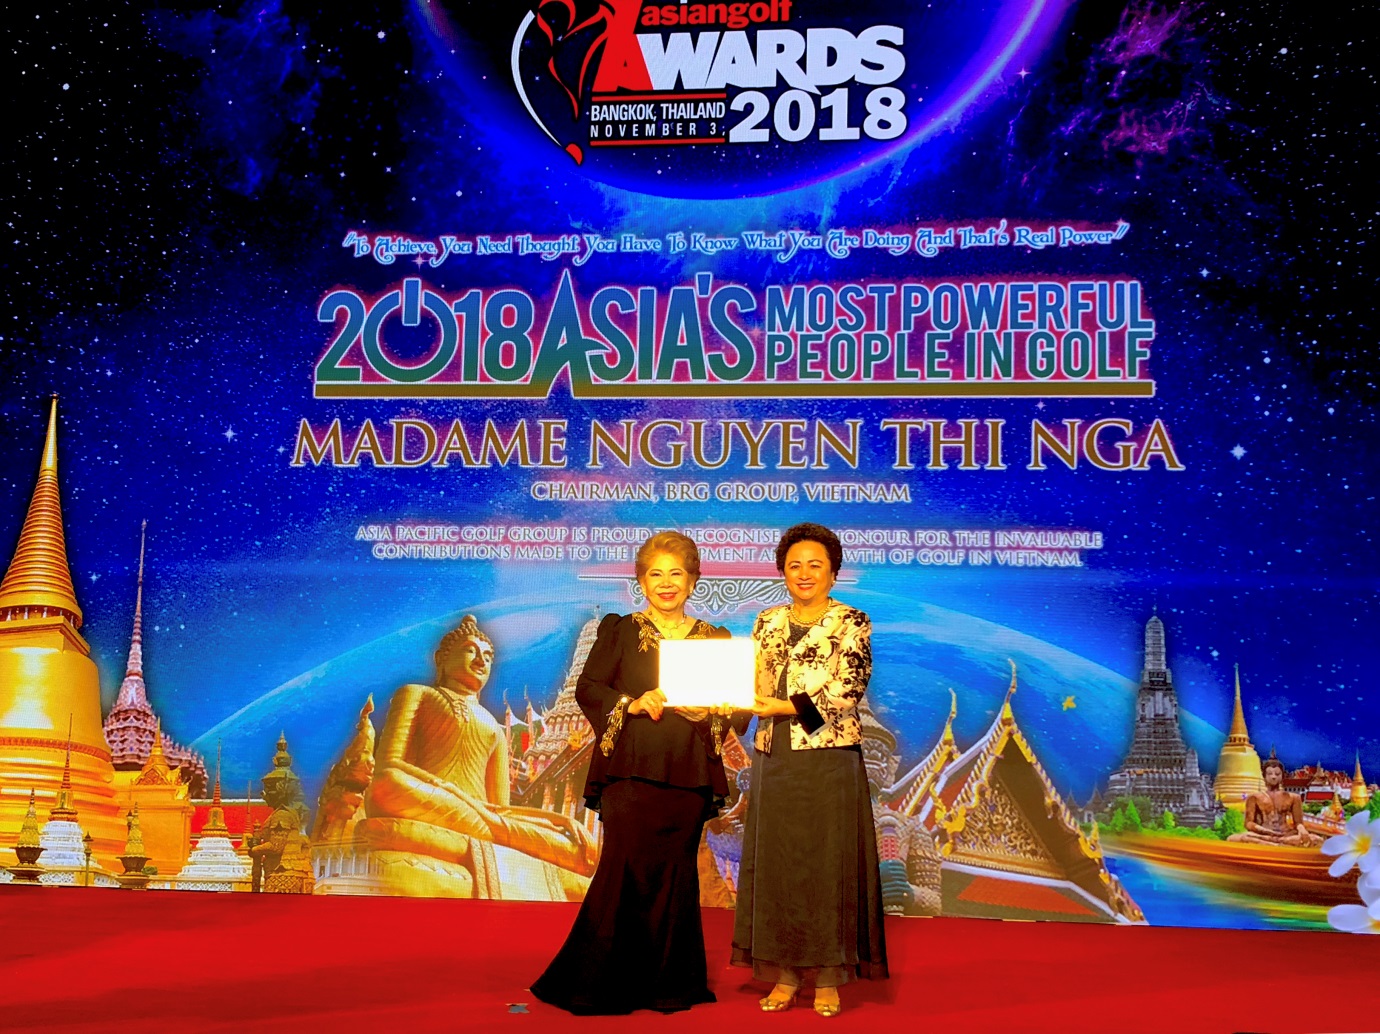 Madame Nguyen Thi Nga, BRG Chairman was named in the list of “Asia’s Most Powerful People in Golf” at the Asia-Pacific Golf Summit 2018